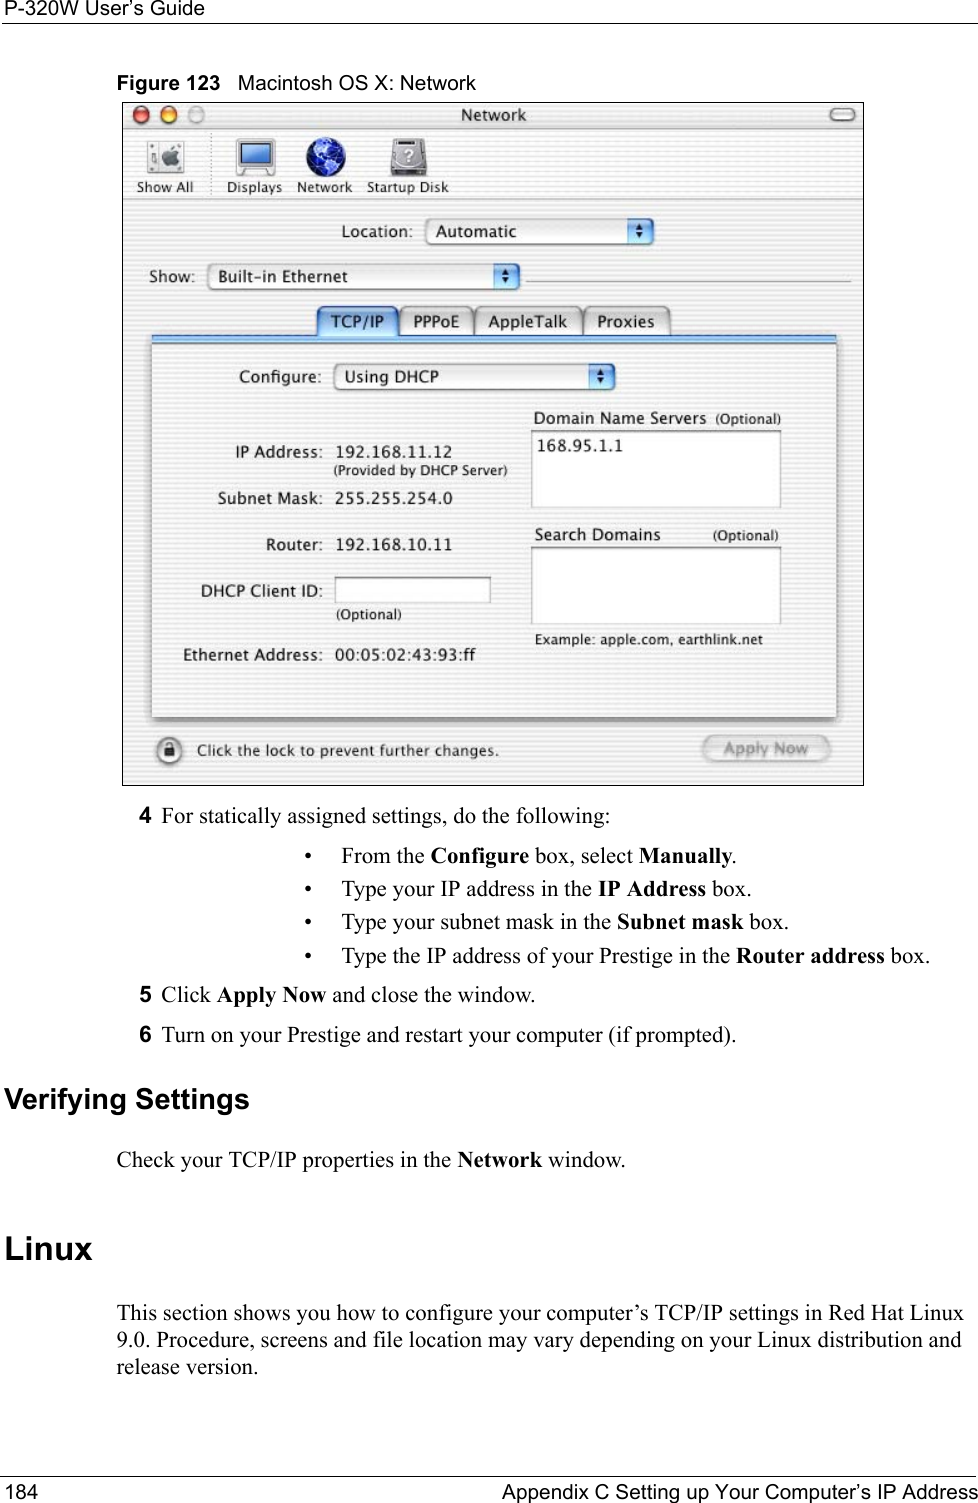 P-320W User’s Guide184  Appendix C Setting up Your Computer’s IP AddressFigure 123   Macintosh OS X: Network4For statically assigned settings, do the following:•From the Configure box, select Manually.• Type your IP address in the IP Address box.• Type your subnet mask in the Subnet mask box.• Type the IP address of your Prestige in the Router address box.5Click Apply Now and close the window.6Turn on your Prestige and restart your computer (if prompted).Verifying SettingsCheck your TCP/IP properties in the Network window.Linux This section shows you how to configure your computer’s TCP/IP settings in Red Hat Linux 9.0. Procedure, screens and file location may vary depending on your Linux distribution and release version. 